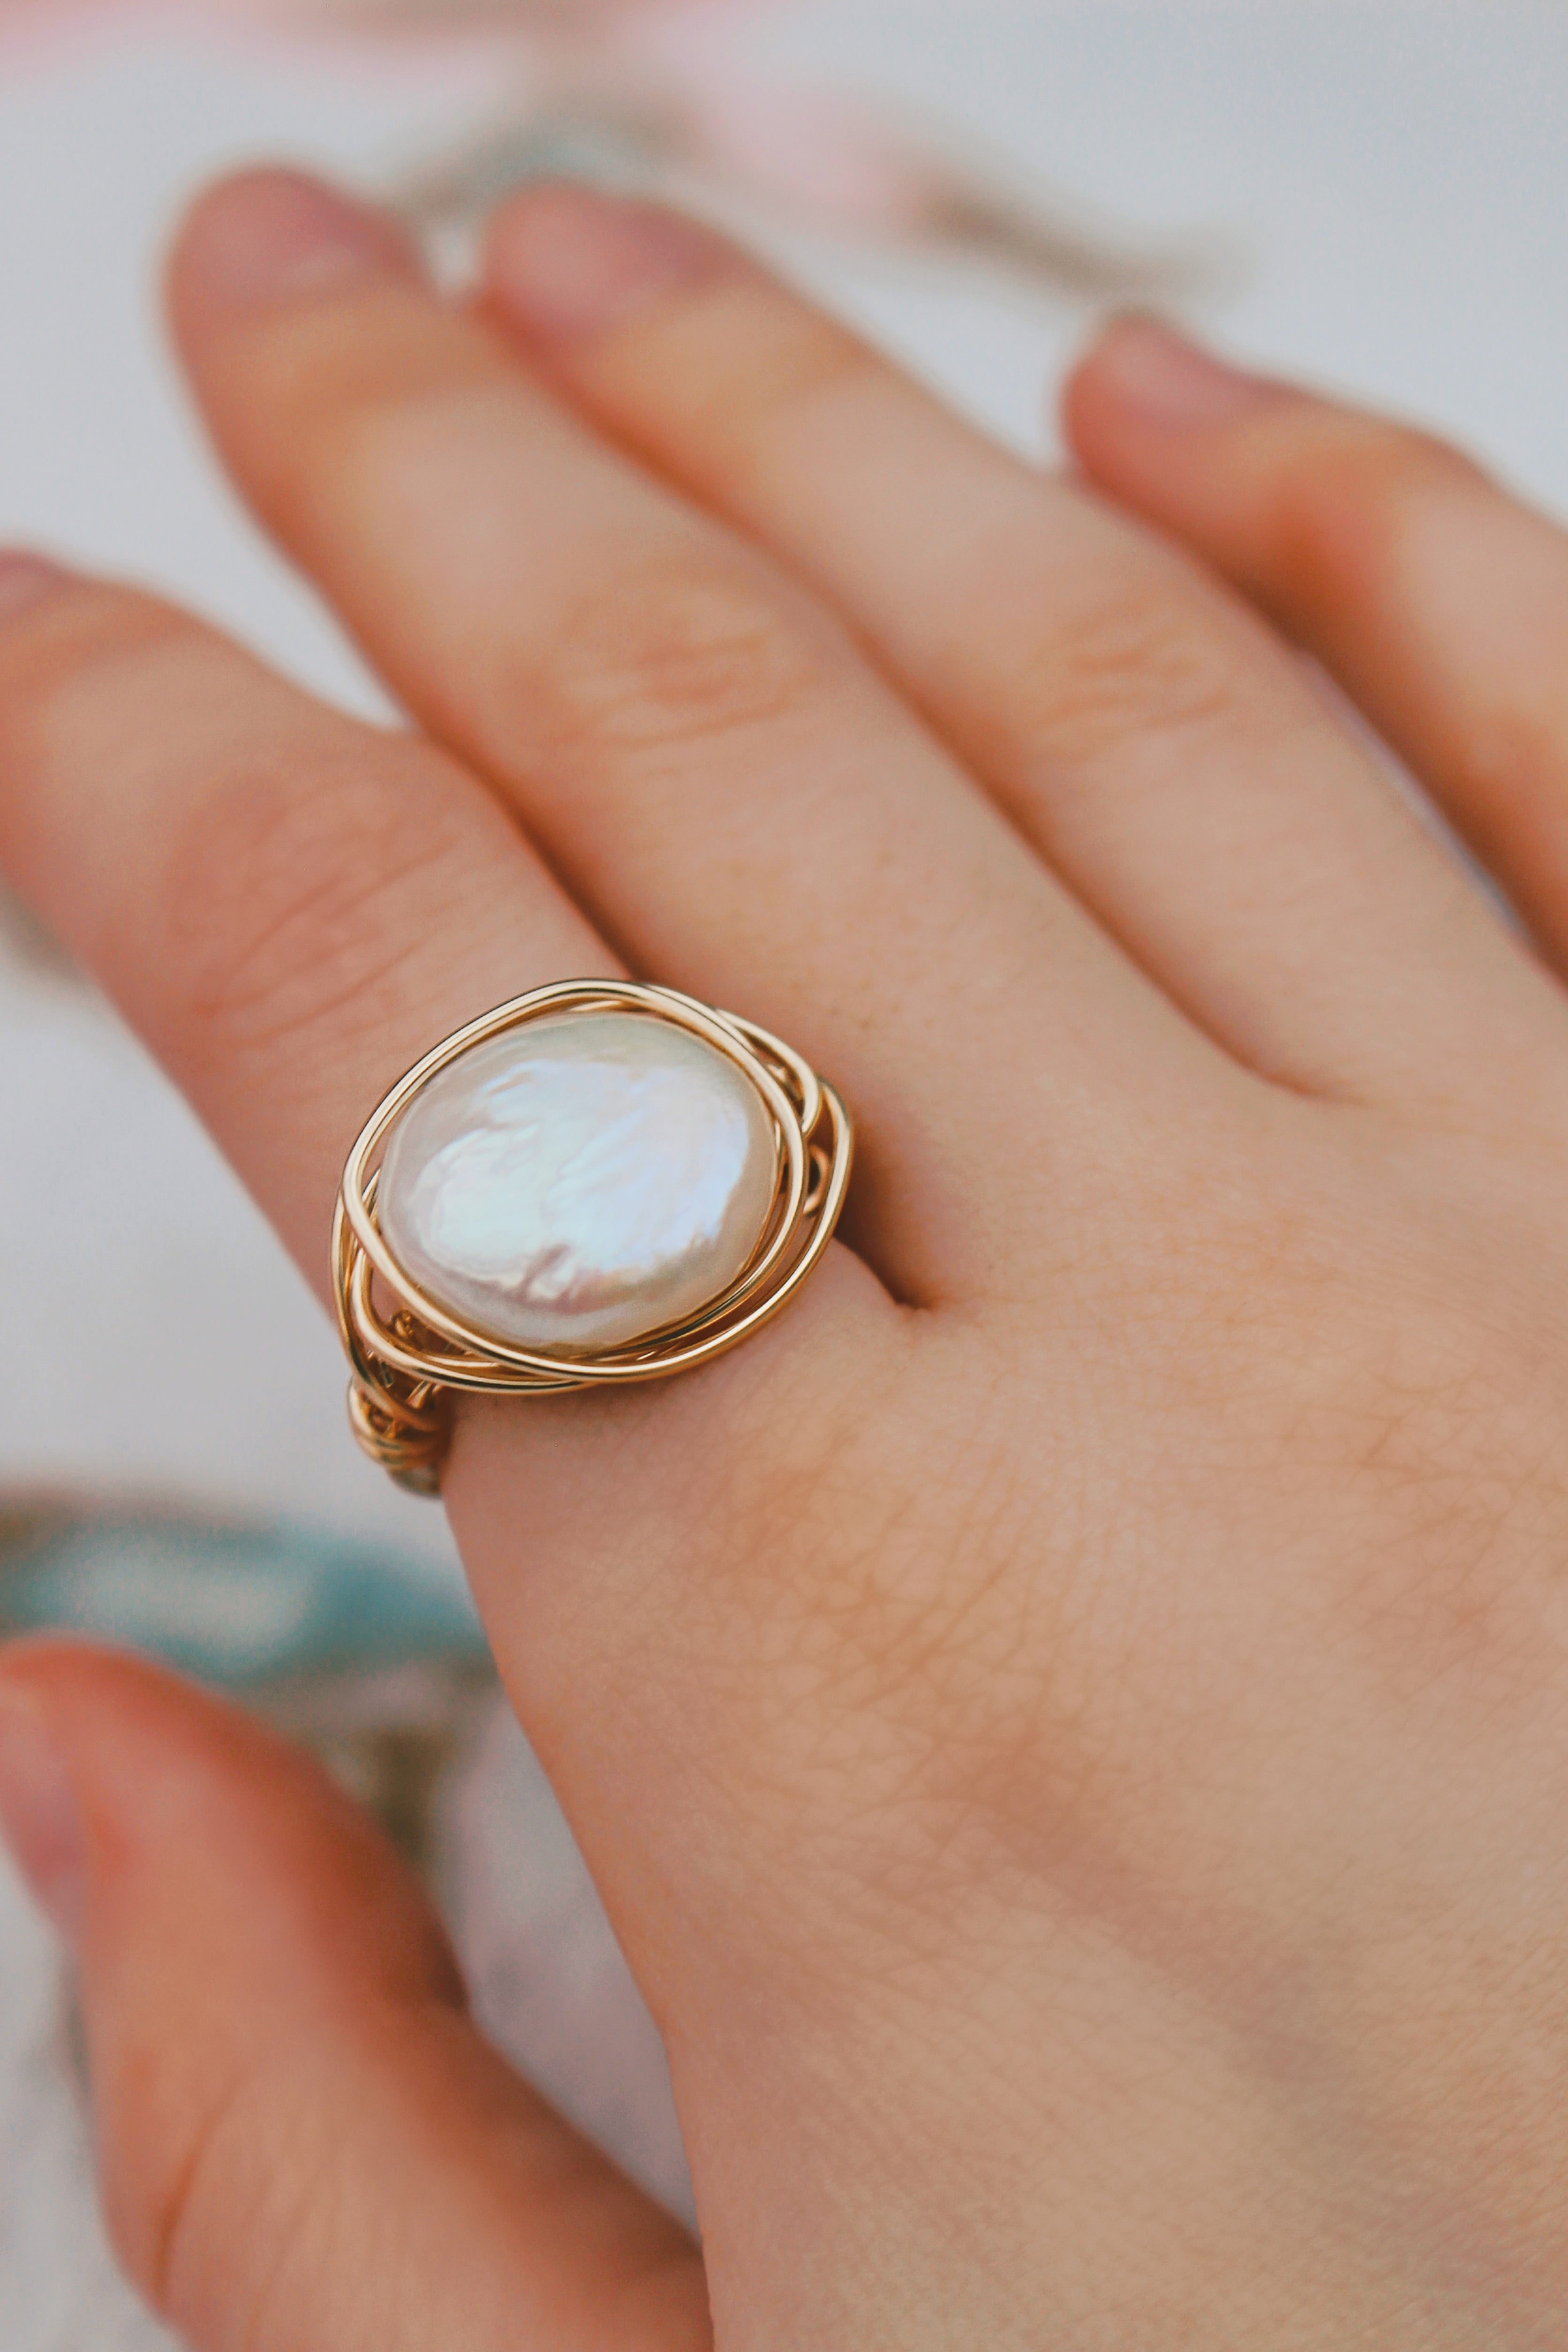 Photo is zoomed into a hand wearing a gold filled wire wrapped coin shaped freshwater pearl, handmade, ring on the pointer finger.